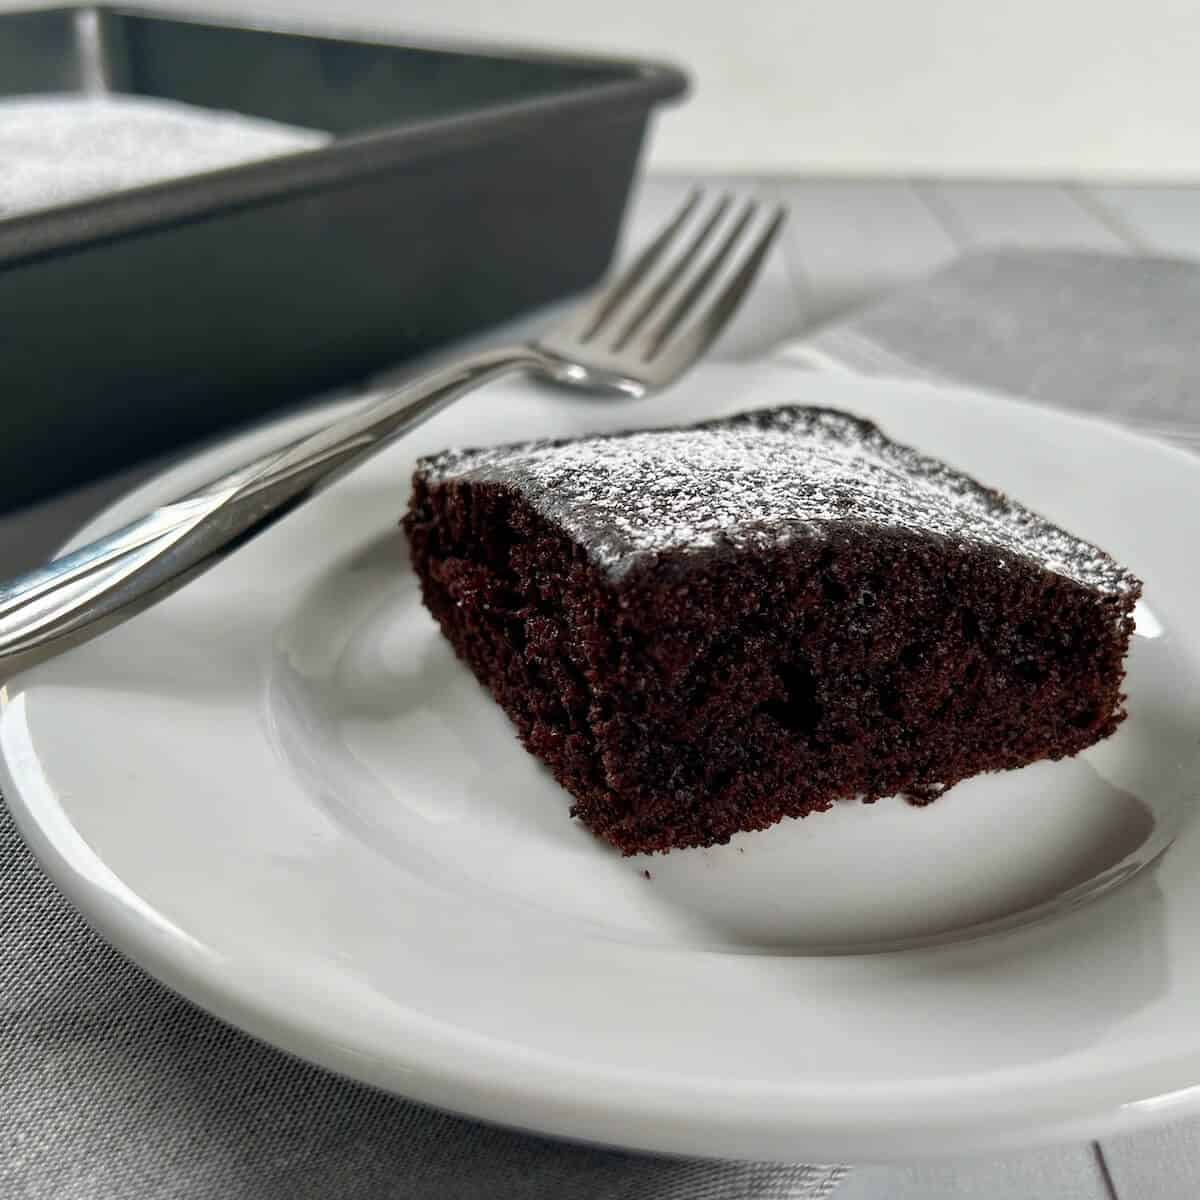 Piece of chocolate cake on a white plate next to a fork with cake in background.